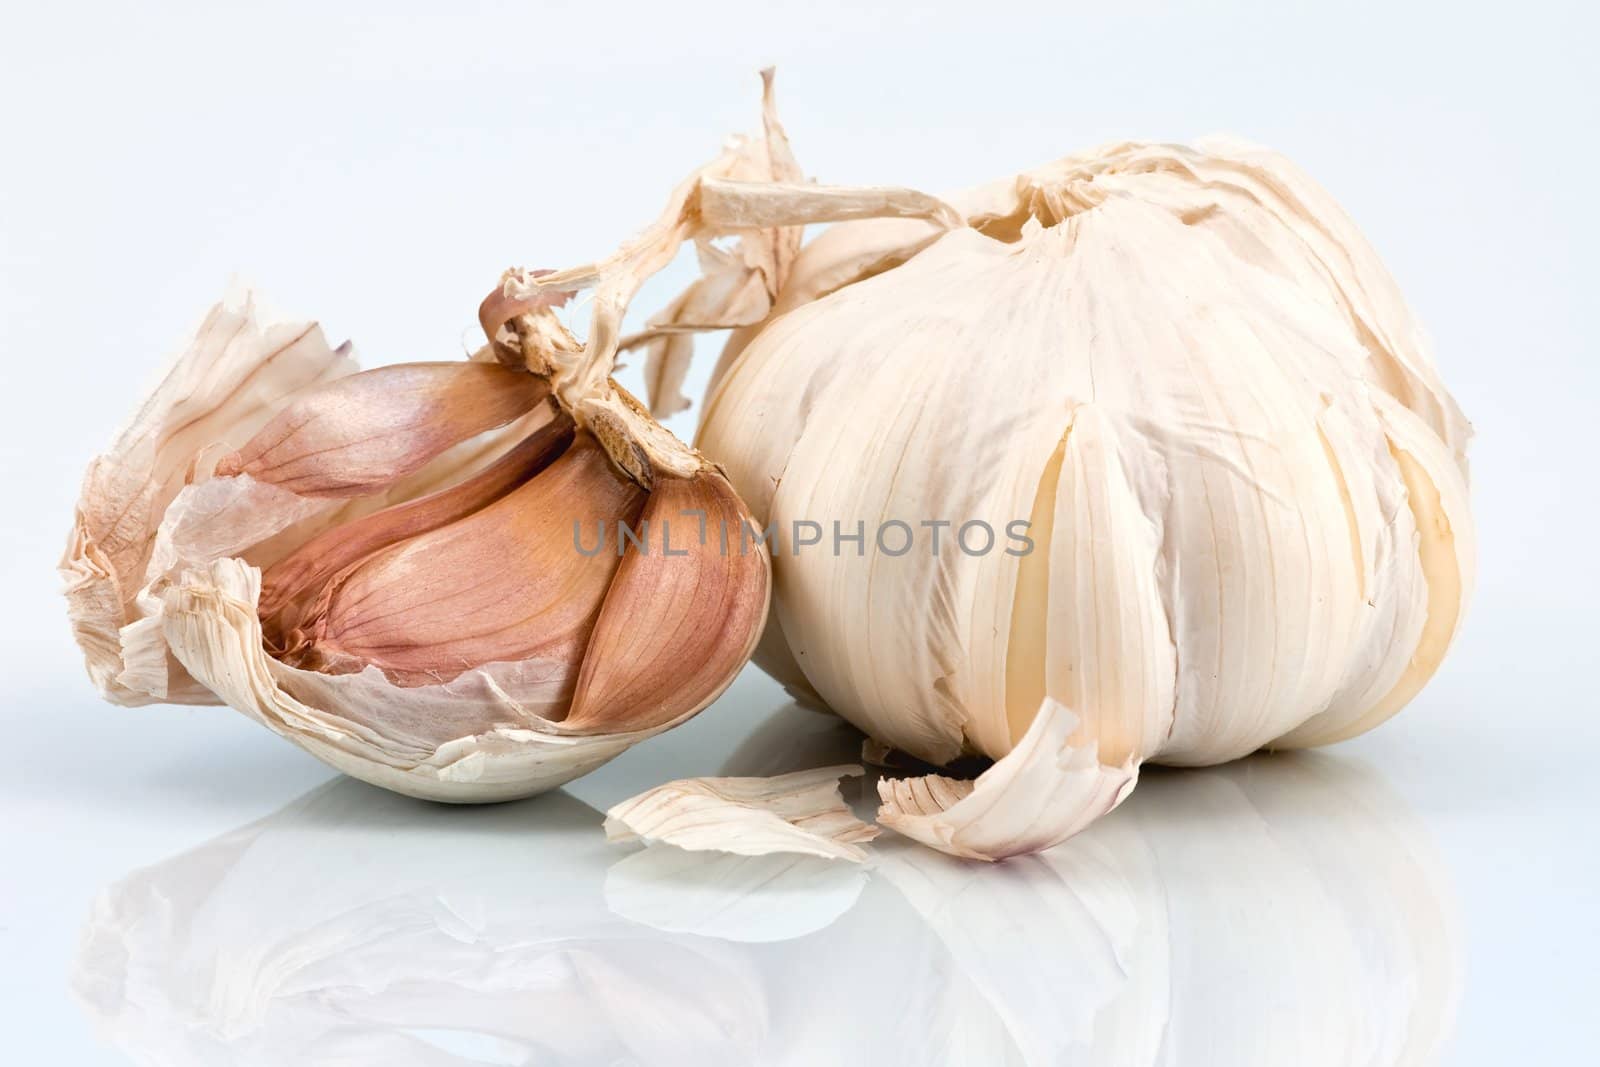 Garlic bulb and cloves by helgy